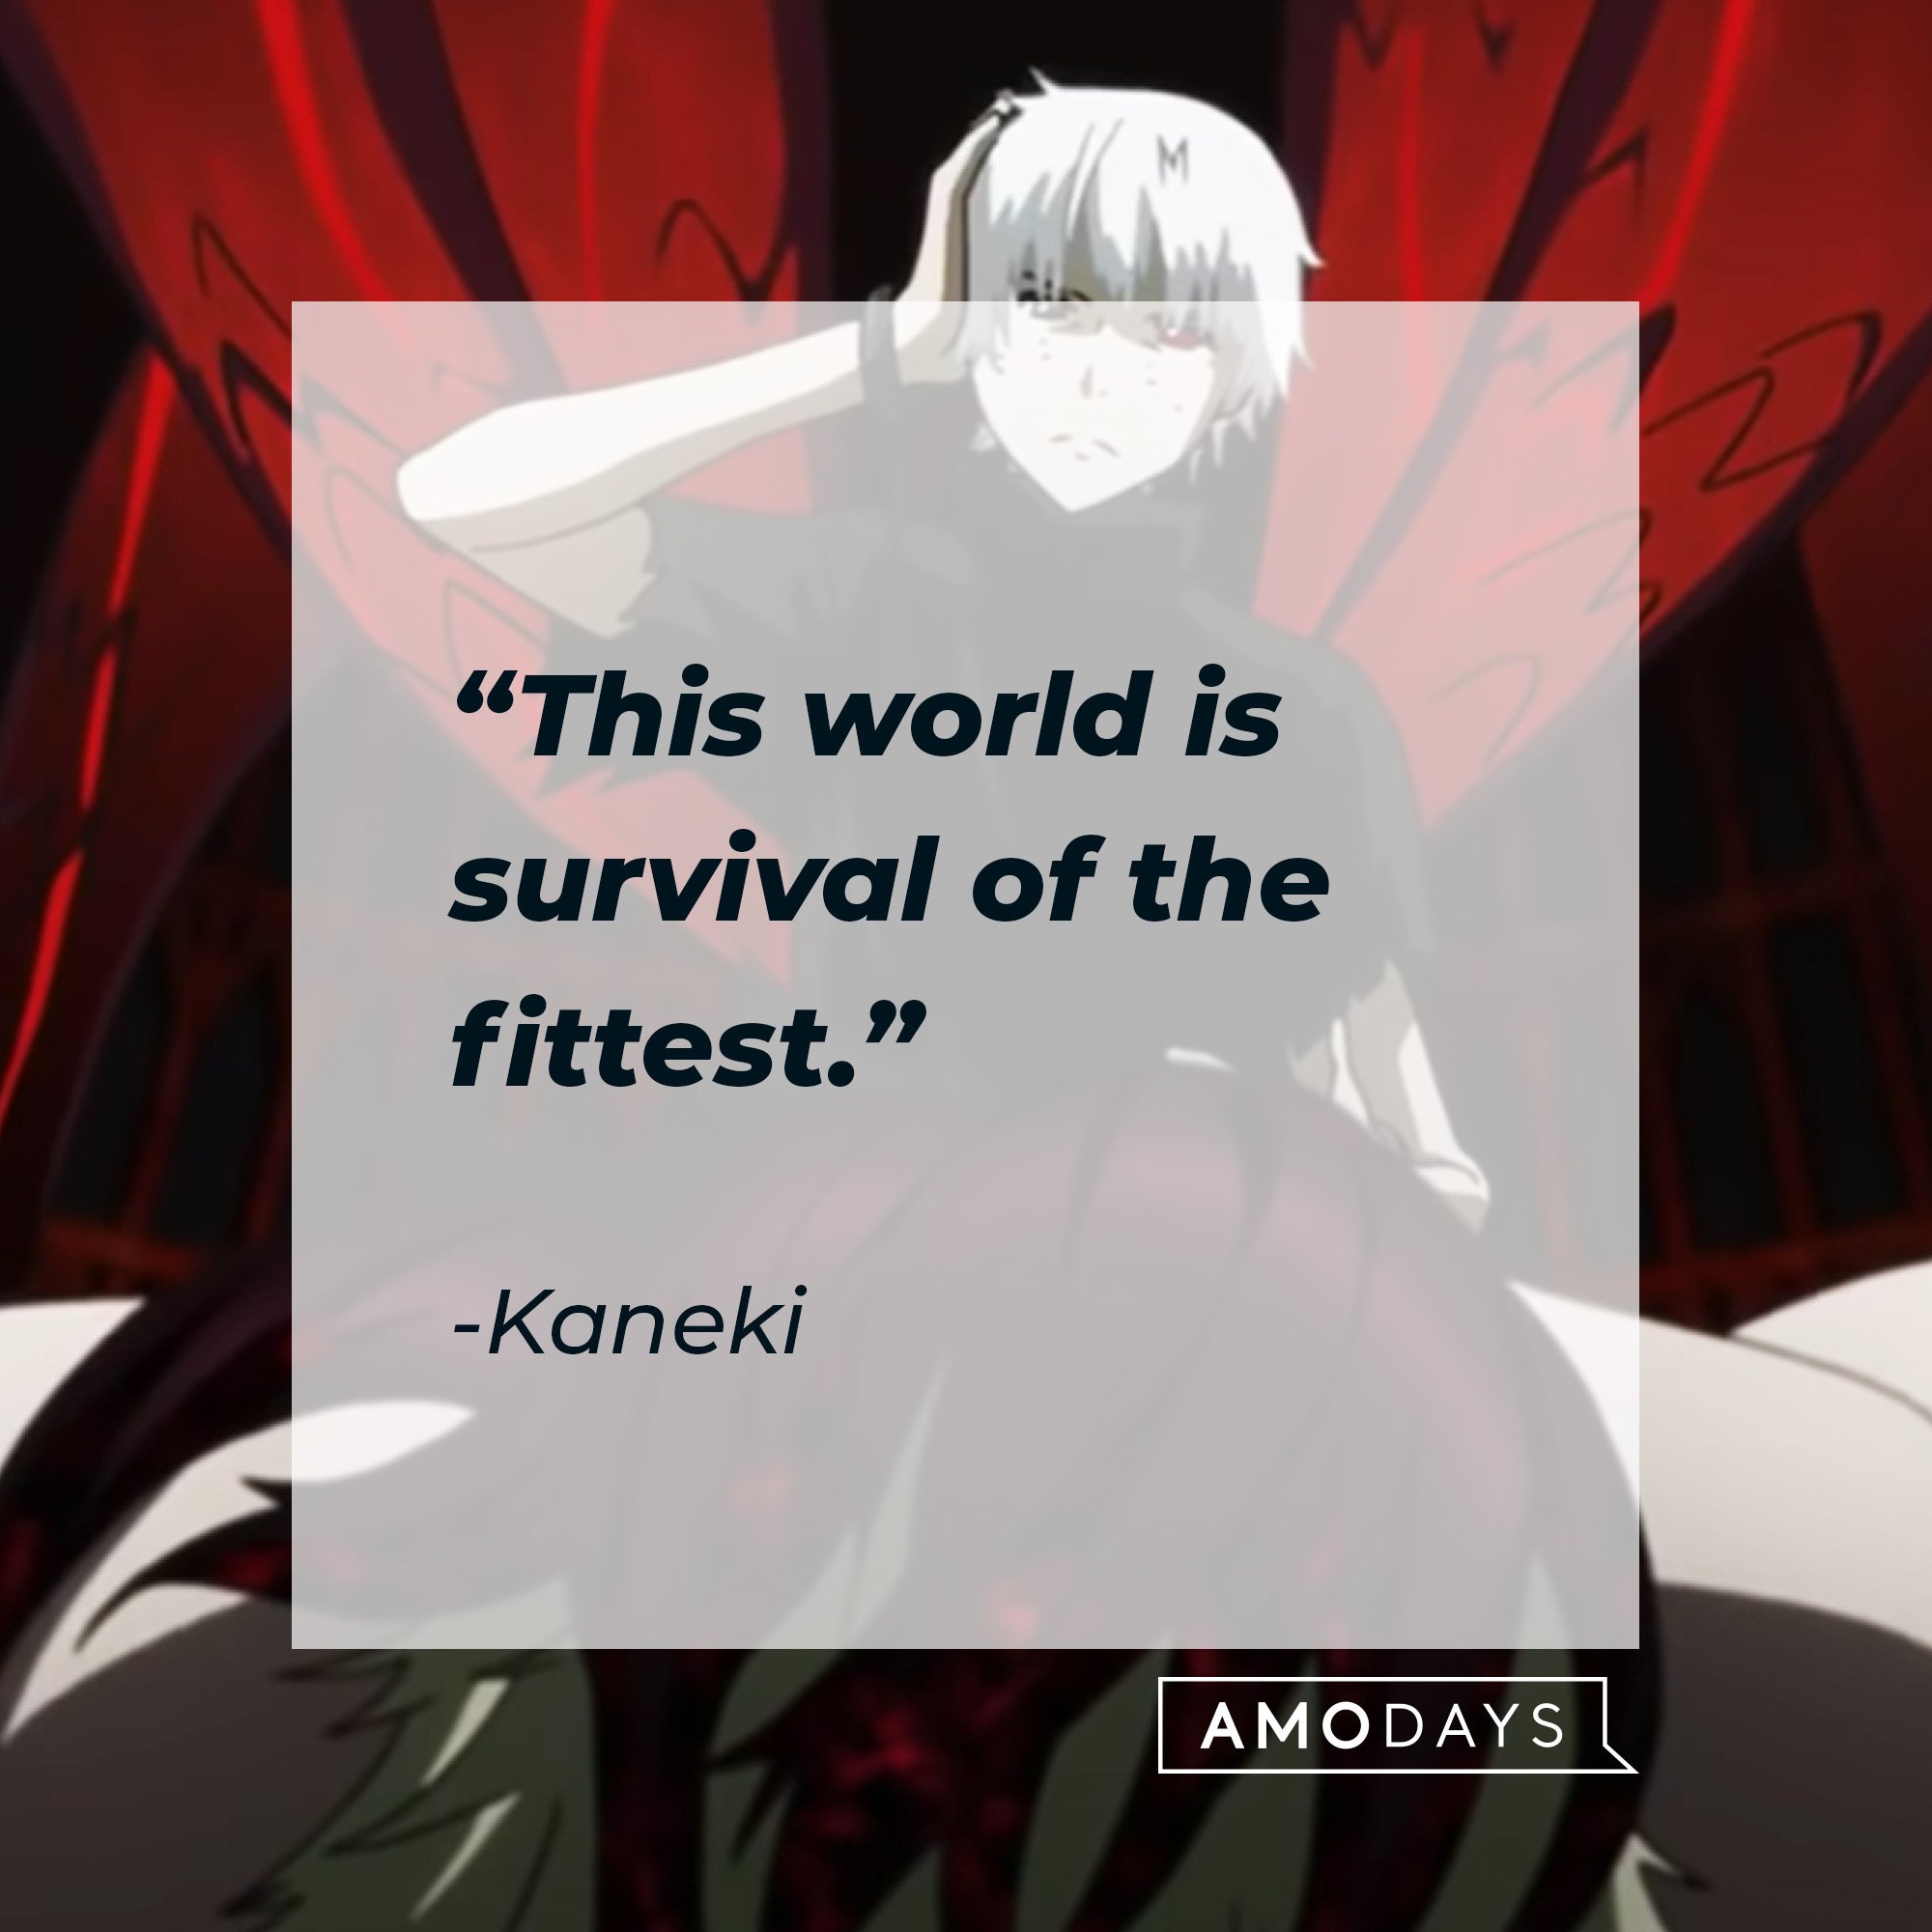 Kaneki's quote: “This world is survival of the fittest.” | Image: AmoDays